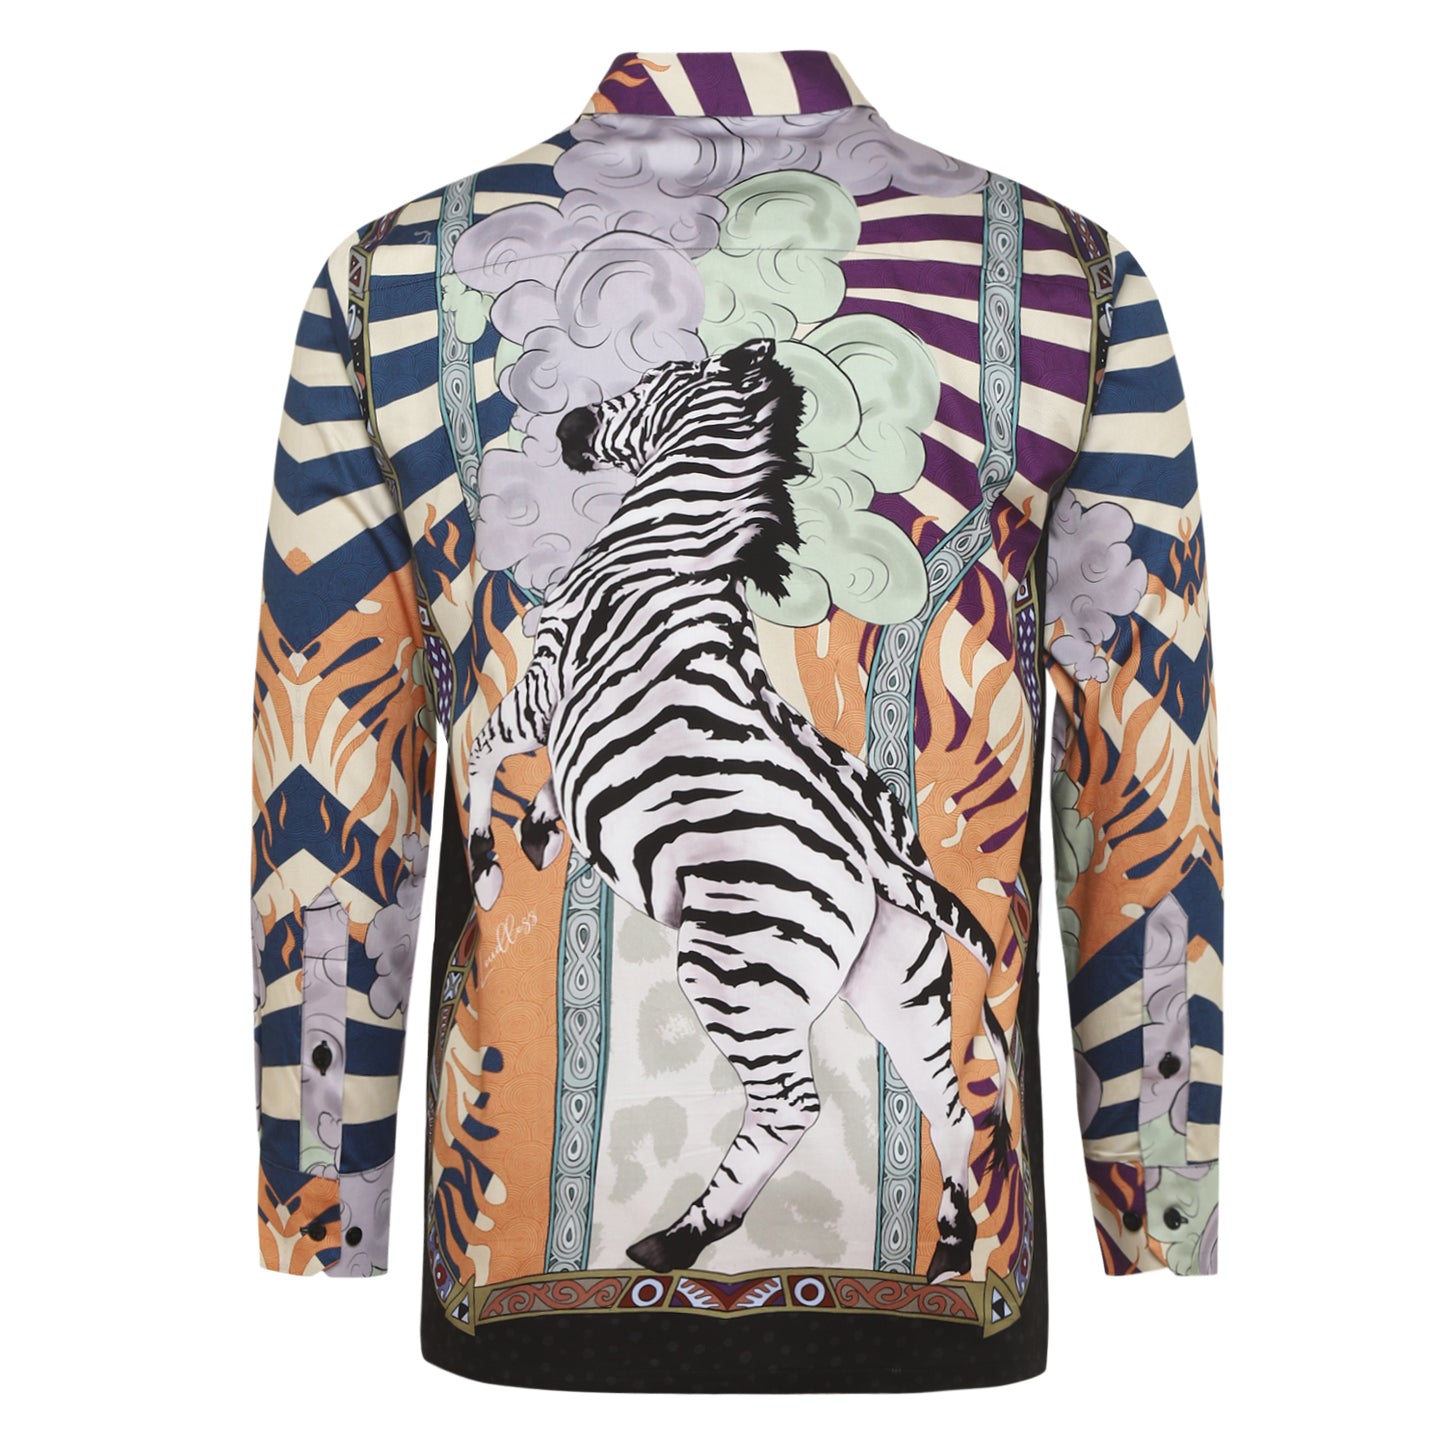 Model shows off a fashionable 100% cotton zebra print shirt, combining comfort and style in one piece. Get ready to make a statement with this unique addition to your wardrobe